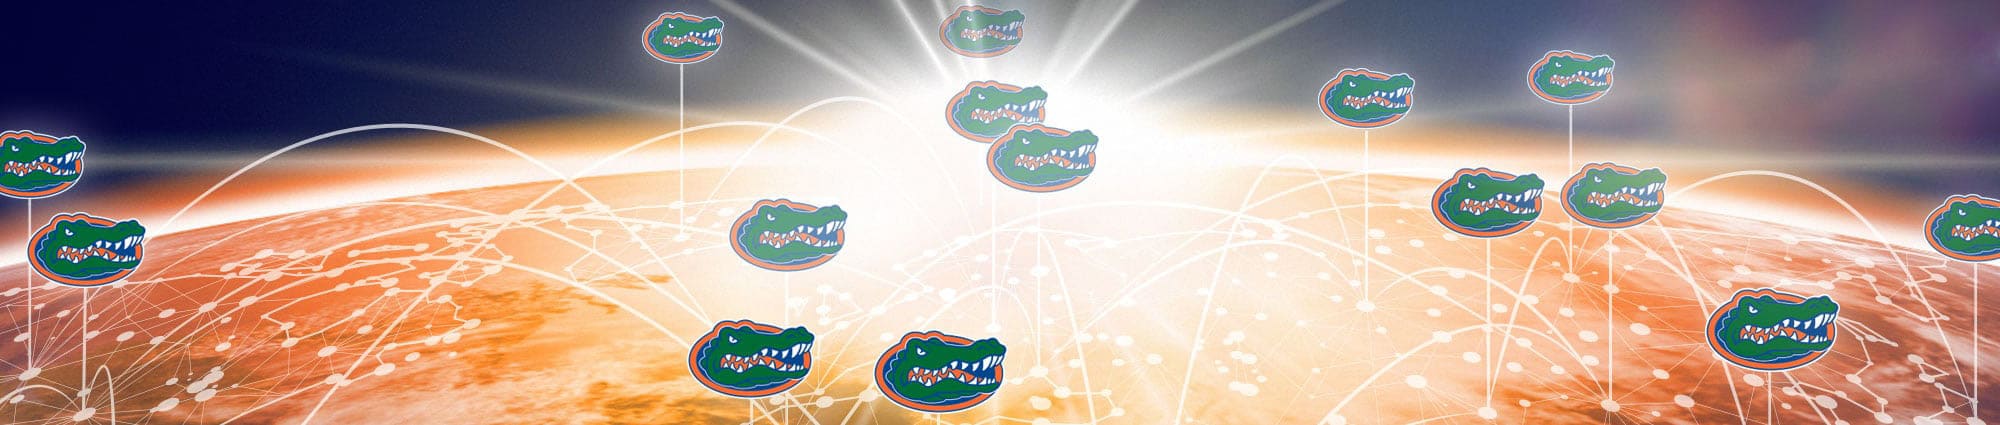 Planet earth with Gator network alumni superimposed